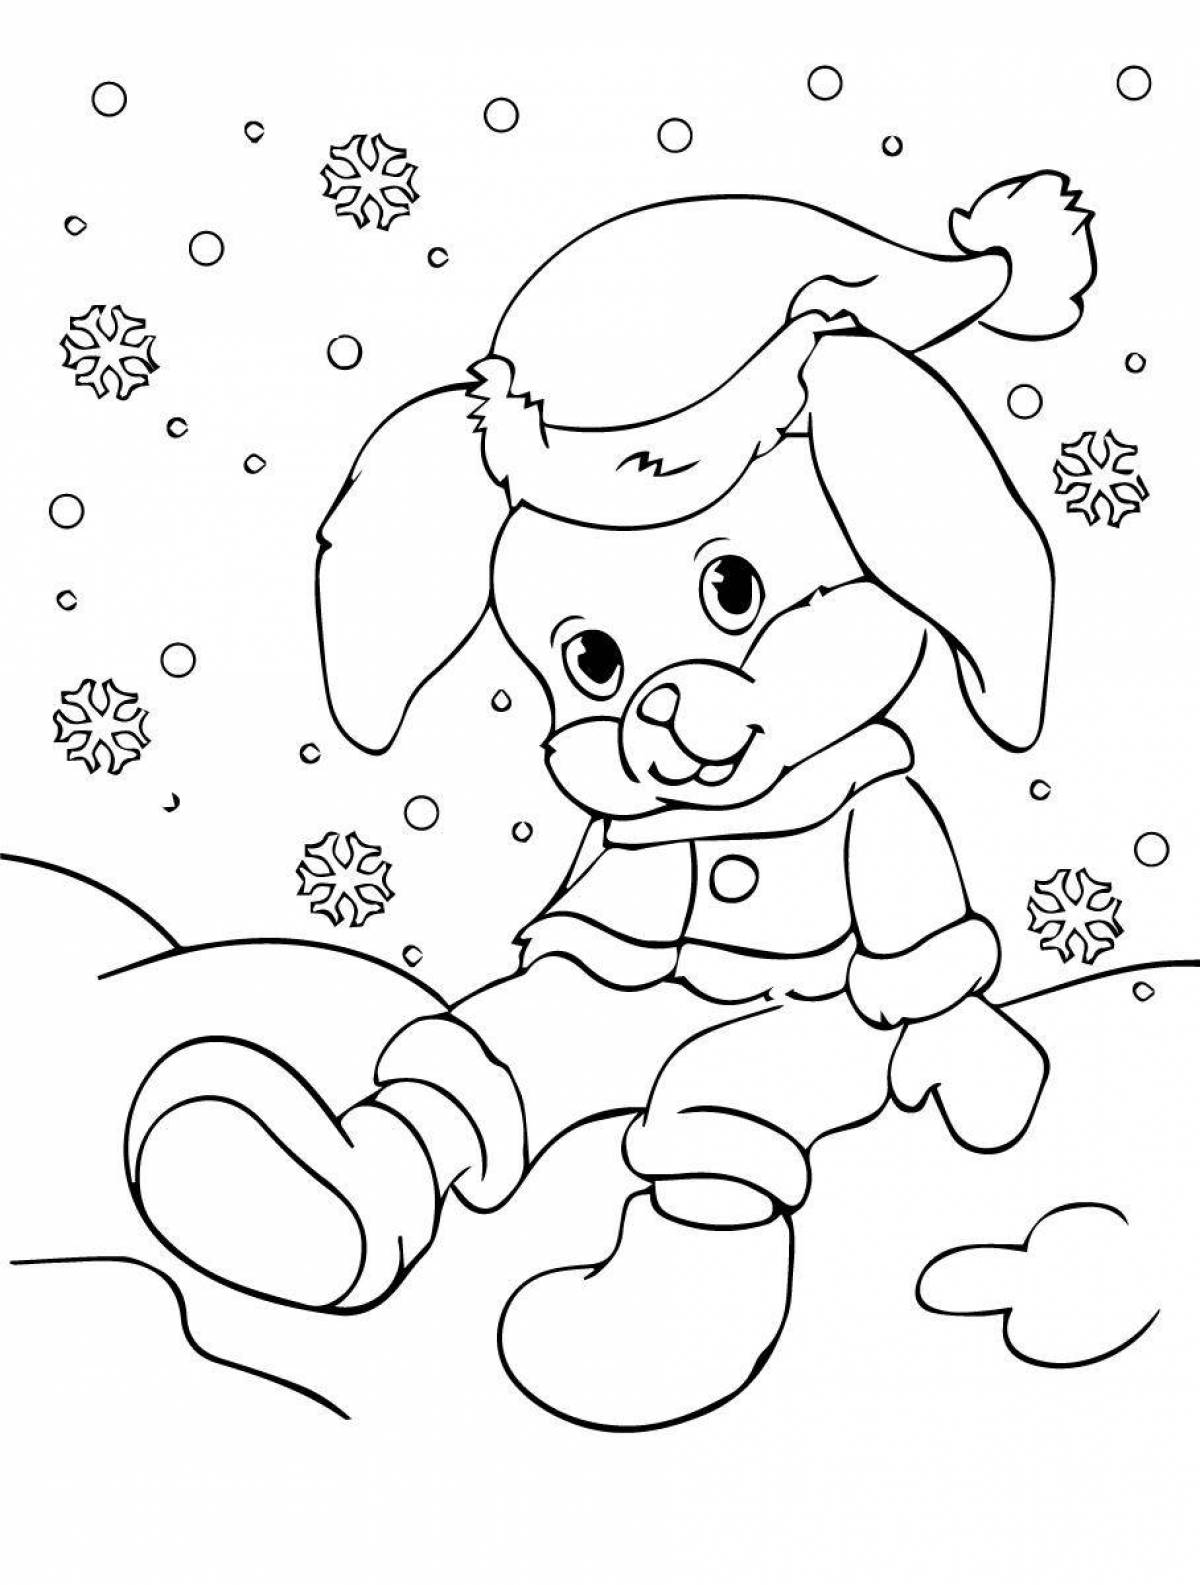 Festive winter Christmas coloring book